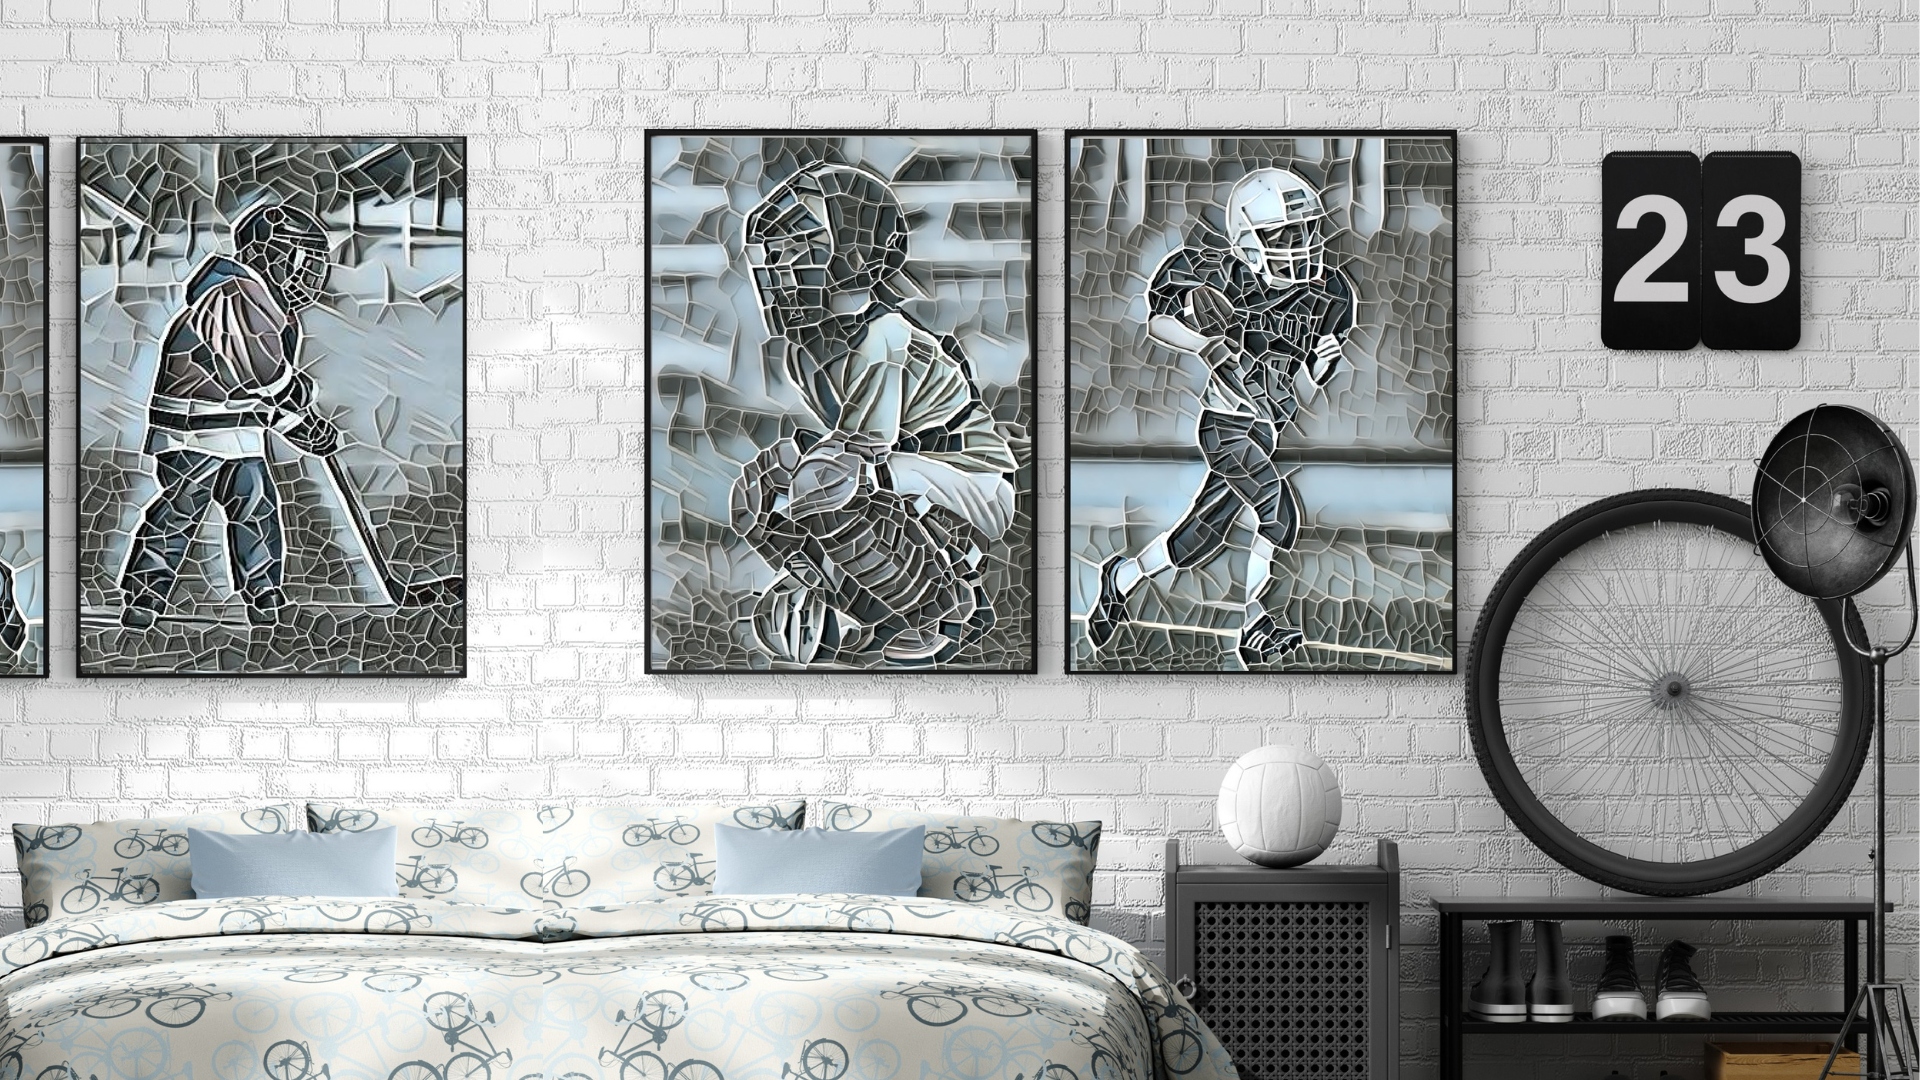 Boys Room Decorated with Sports Art